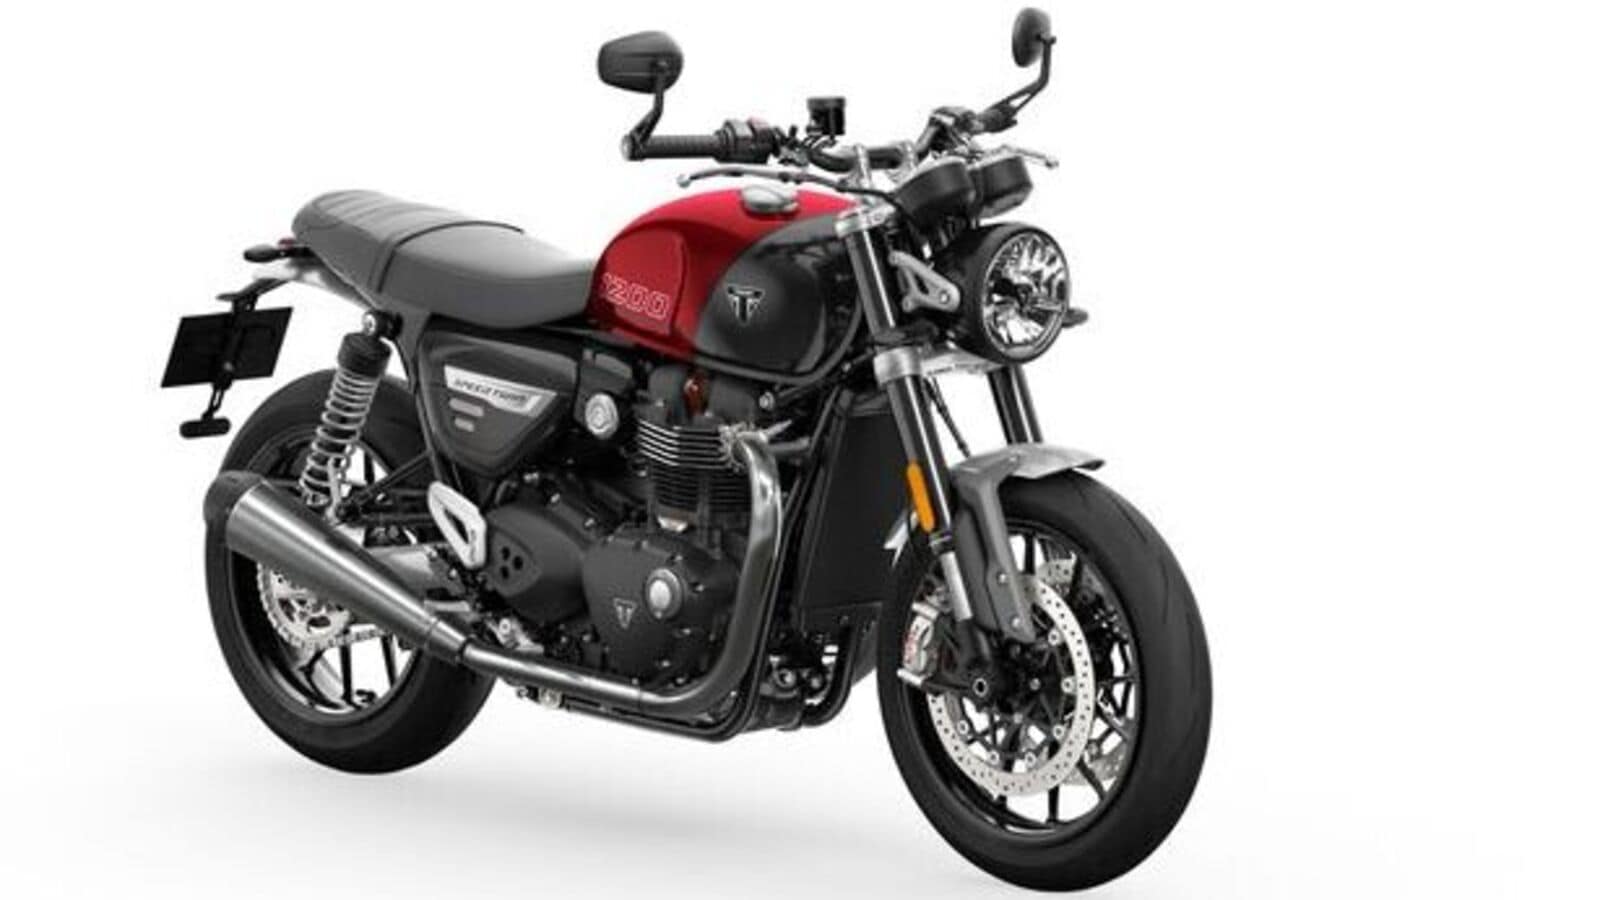 World premiere of Triumph Speed Twin 900 and Speed Twin 1200 for India